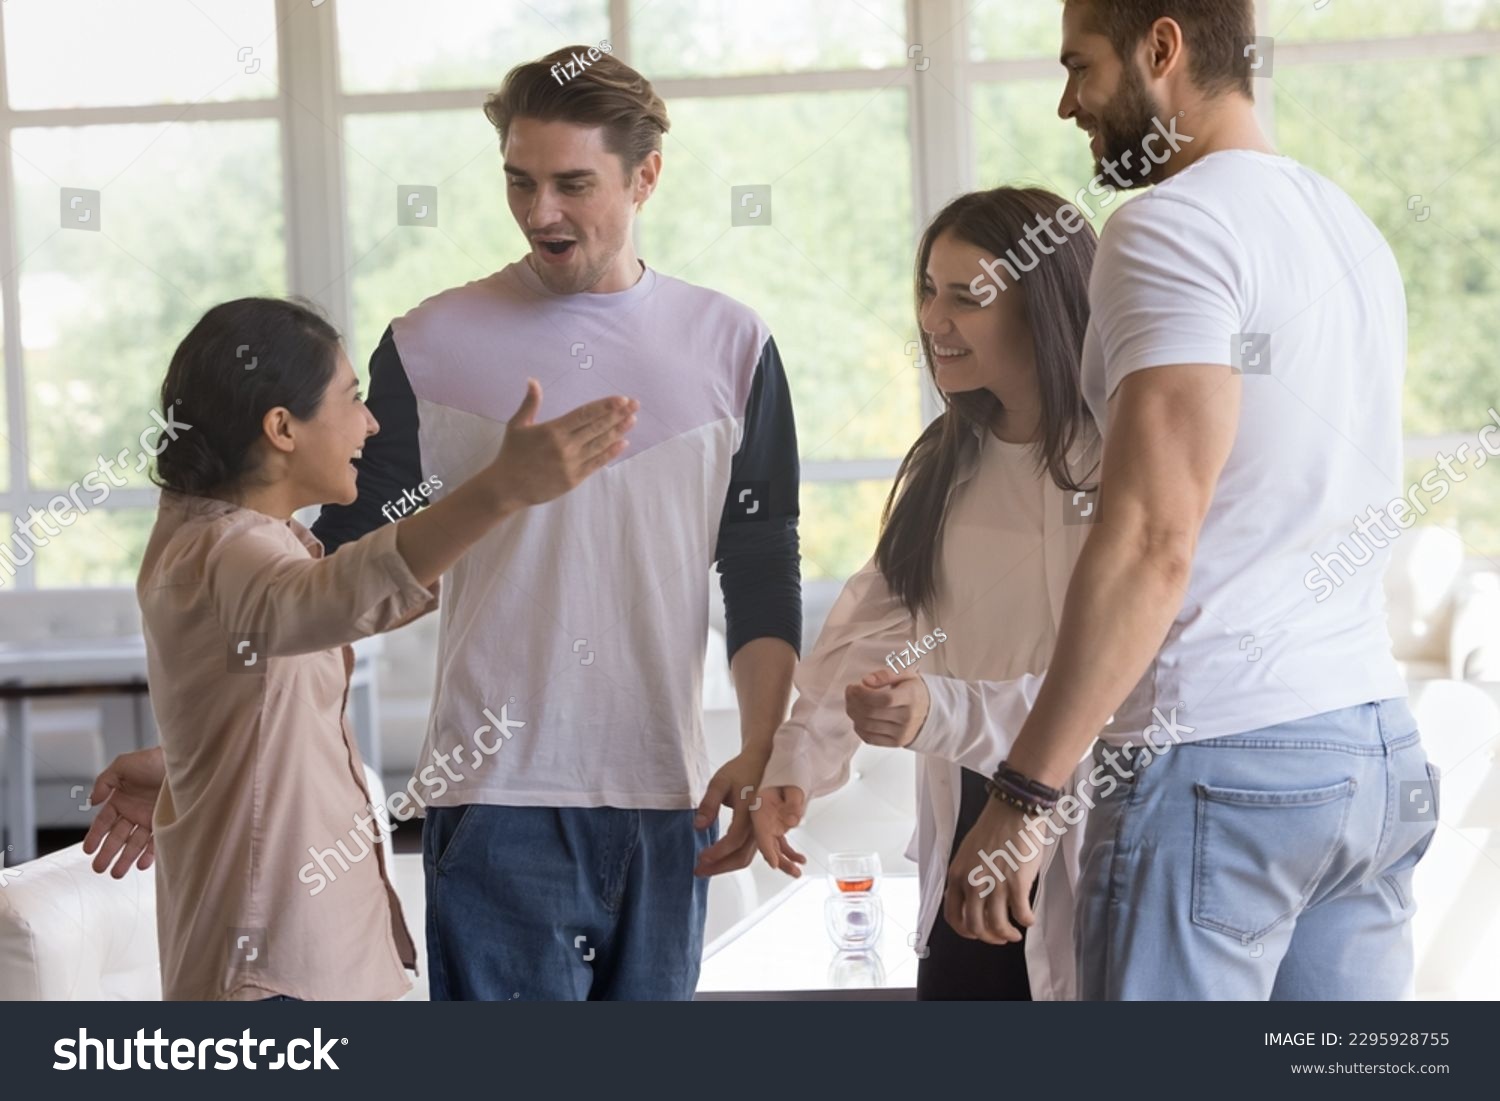 Indian woman greets best friends meet in modern cafe, looks surprised welcoming, hugging guys and girl, stand together, enjoy friendship gather in public place, express warmth and friendly relations #2295928755